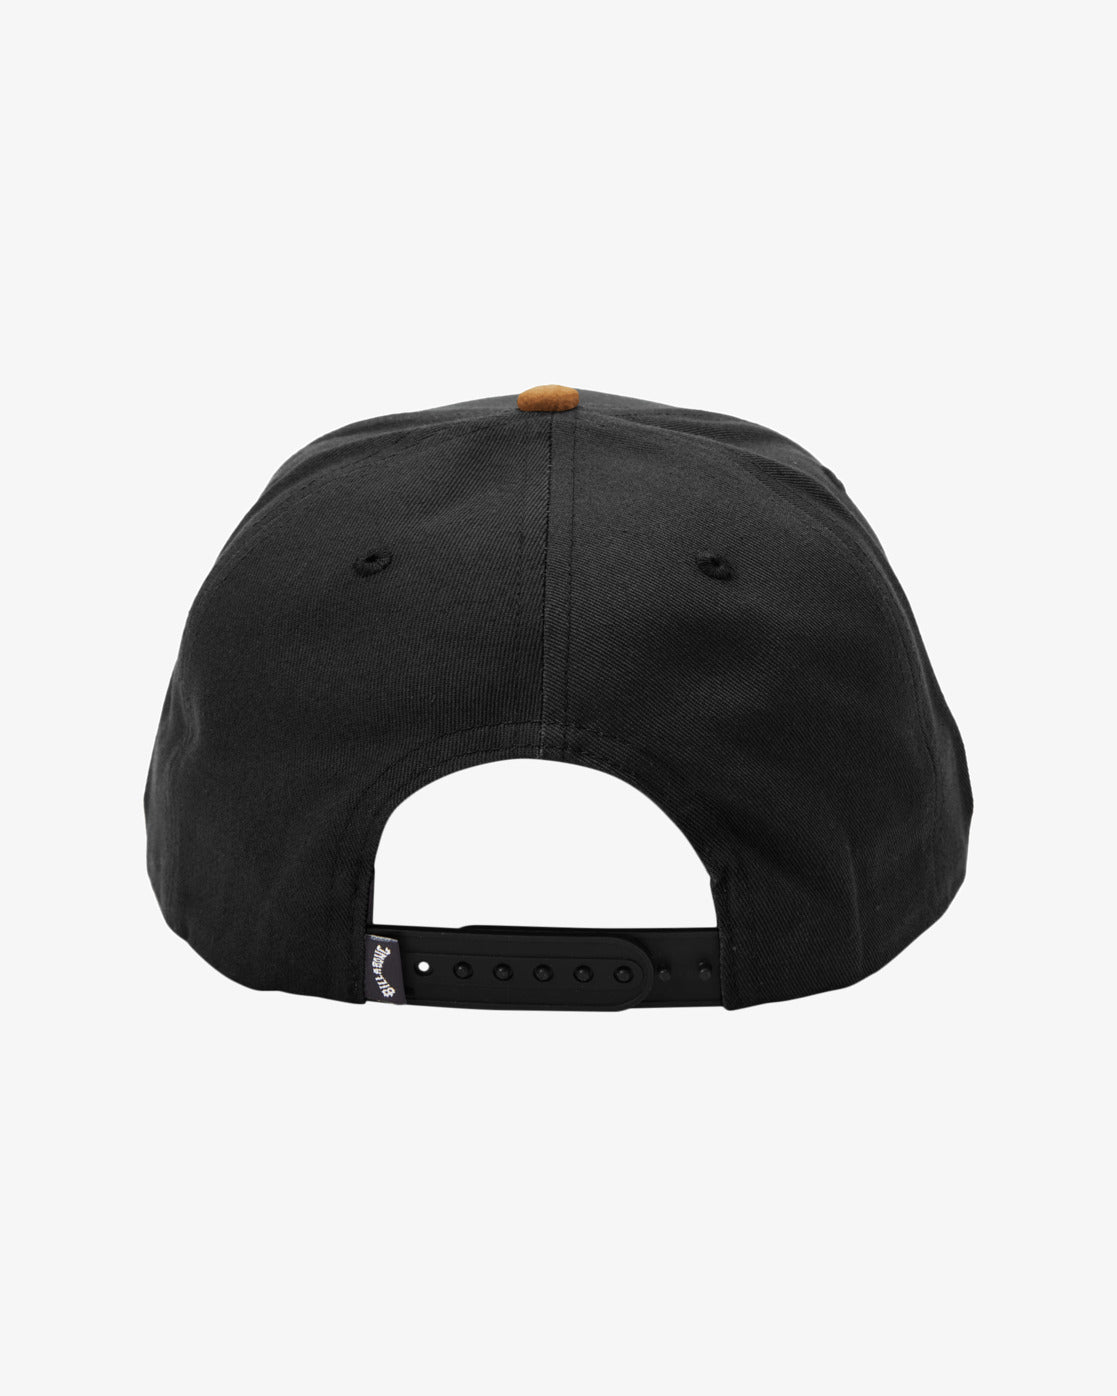 Stacked Snapback Hat